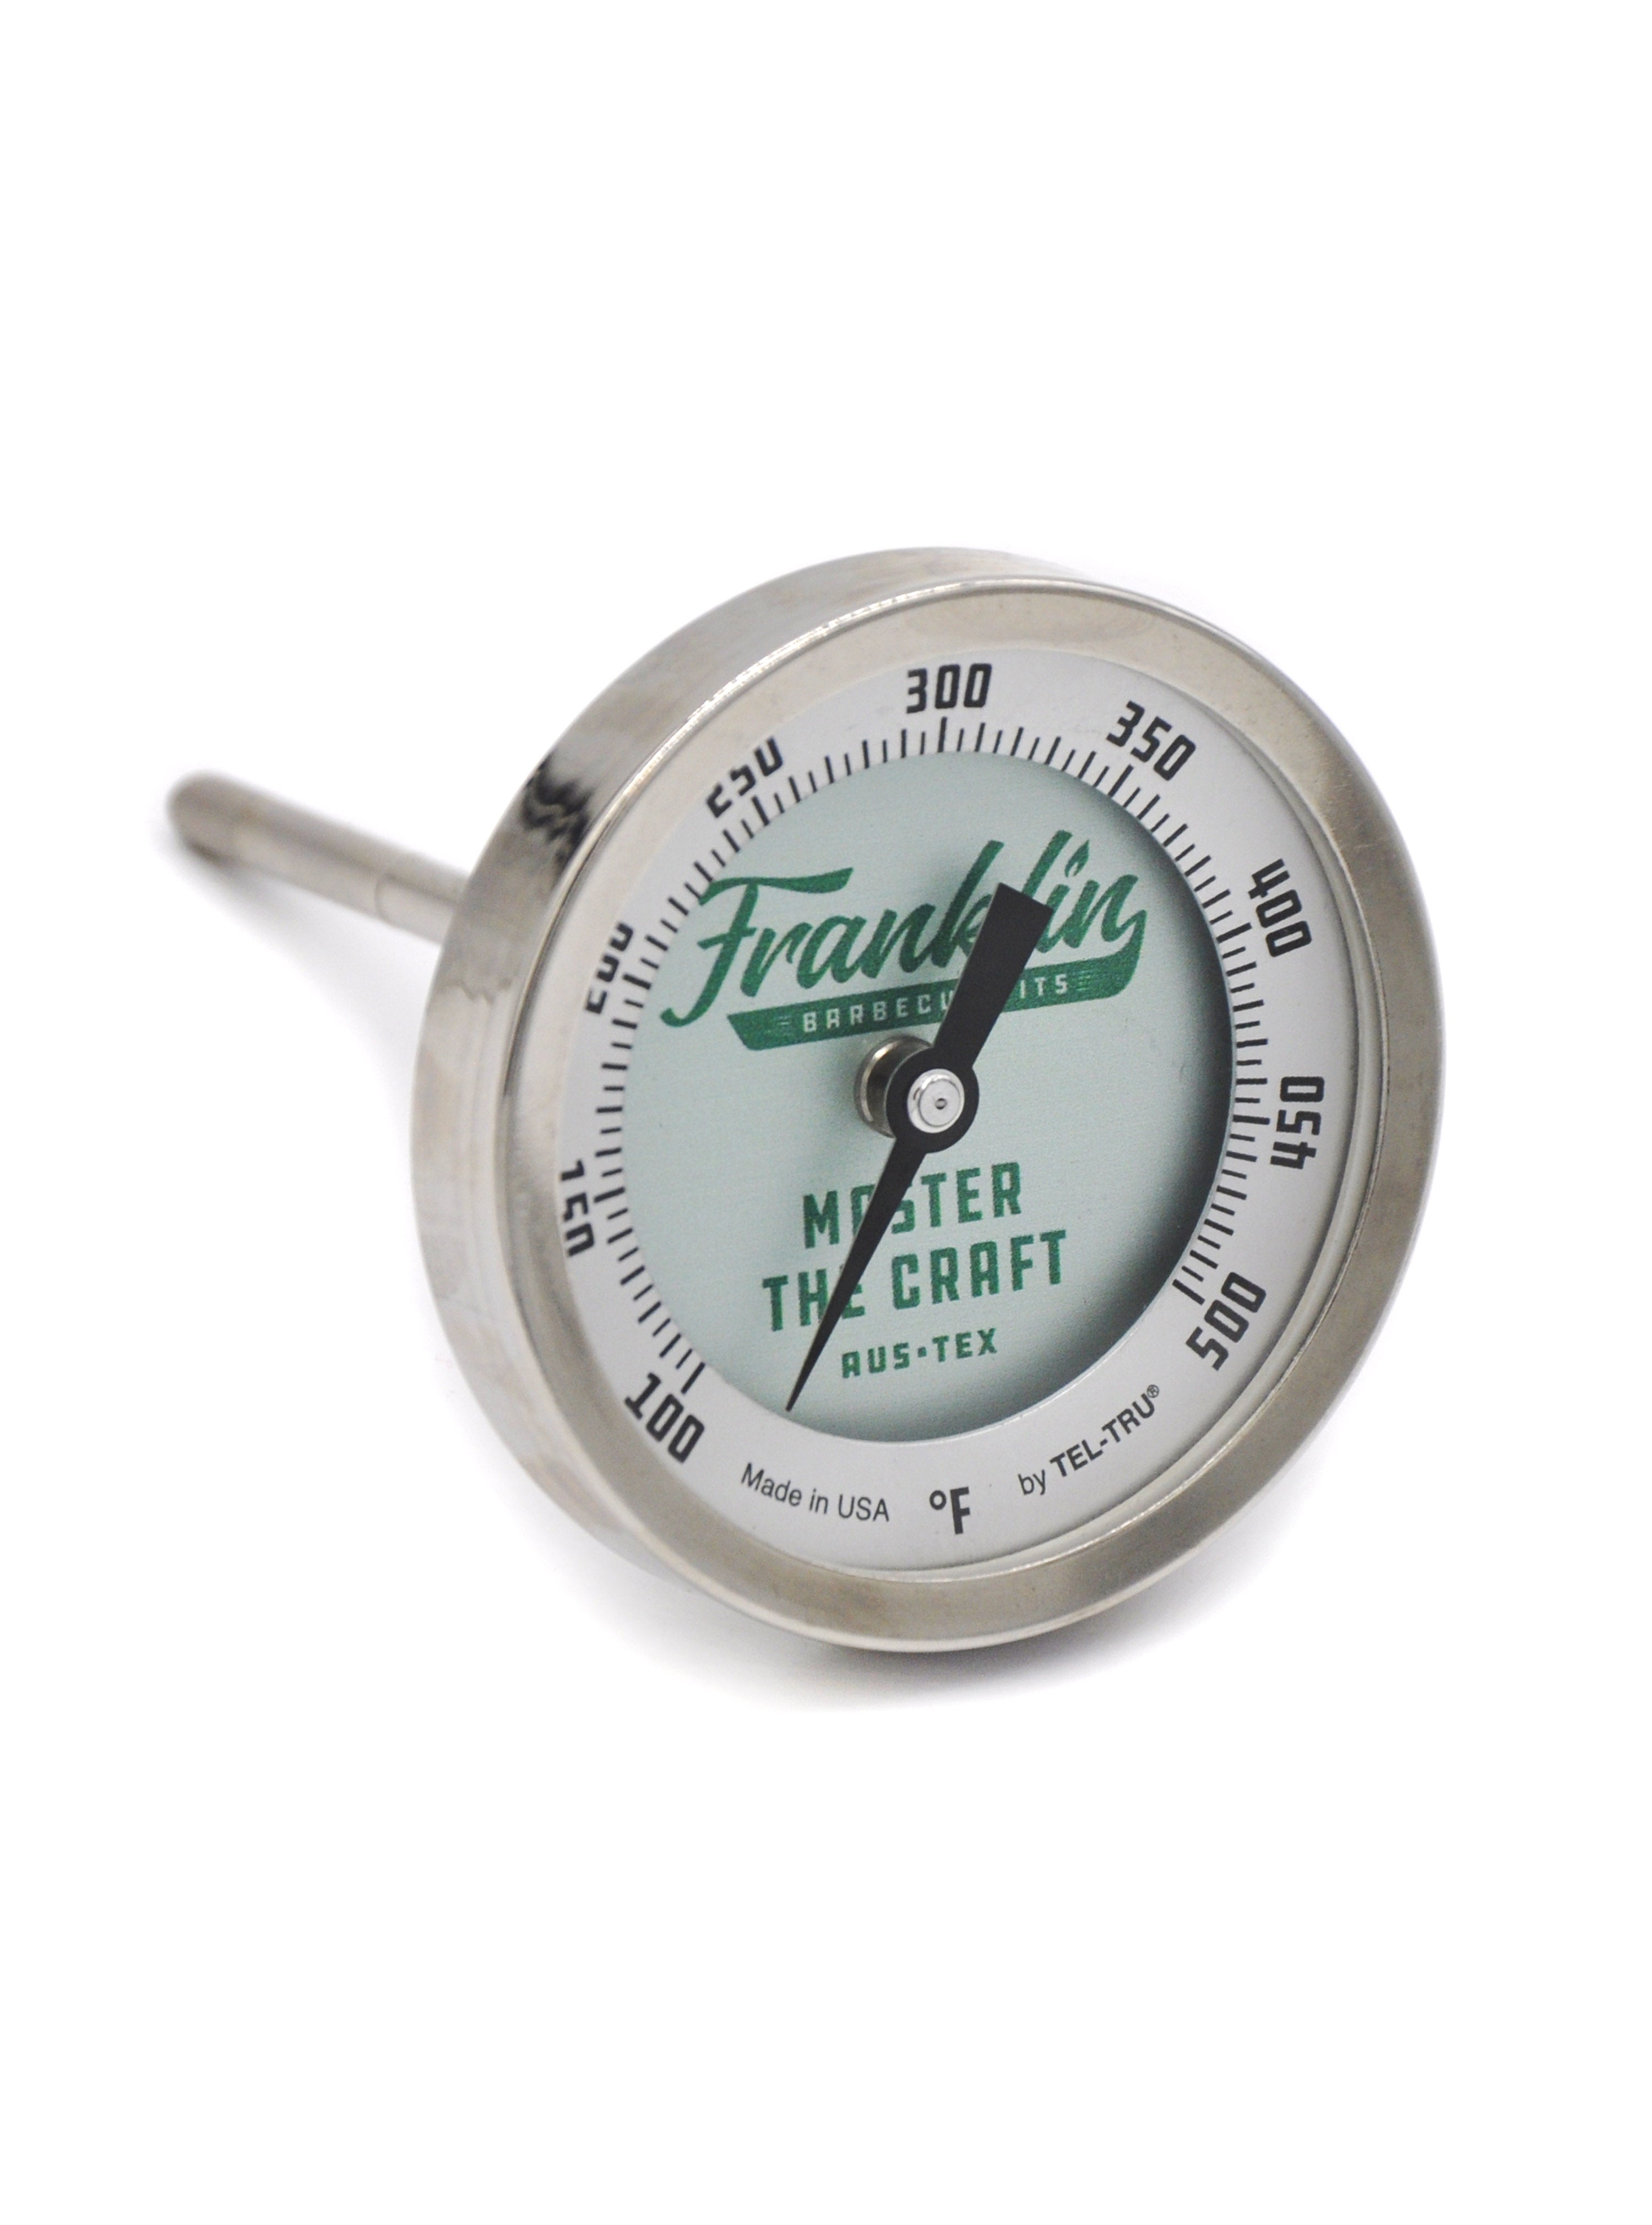 Instrument Verkoper frequentie Franklin Barbecue Pits Thermometer